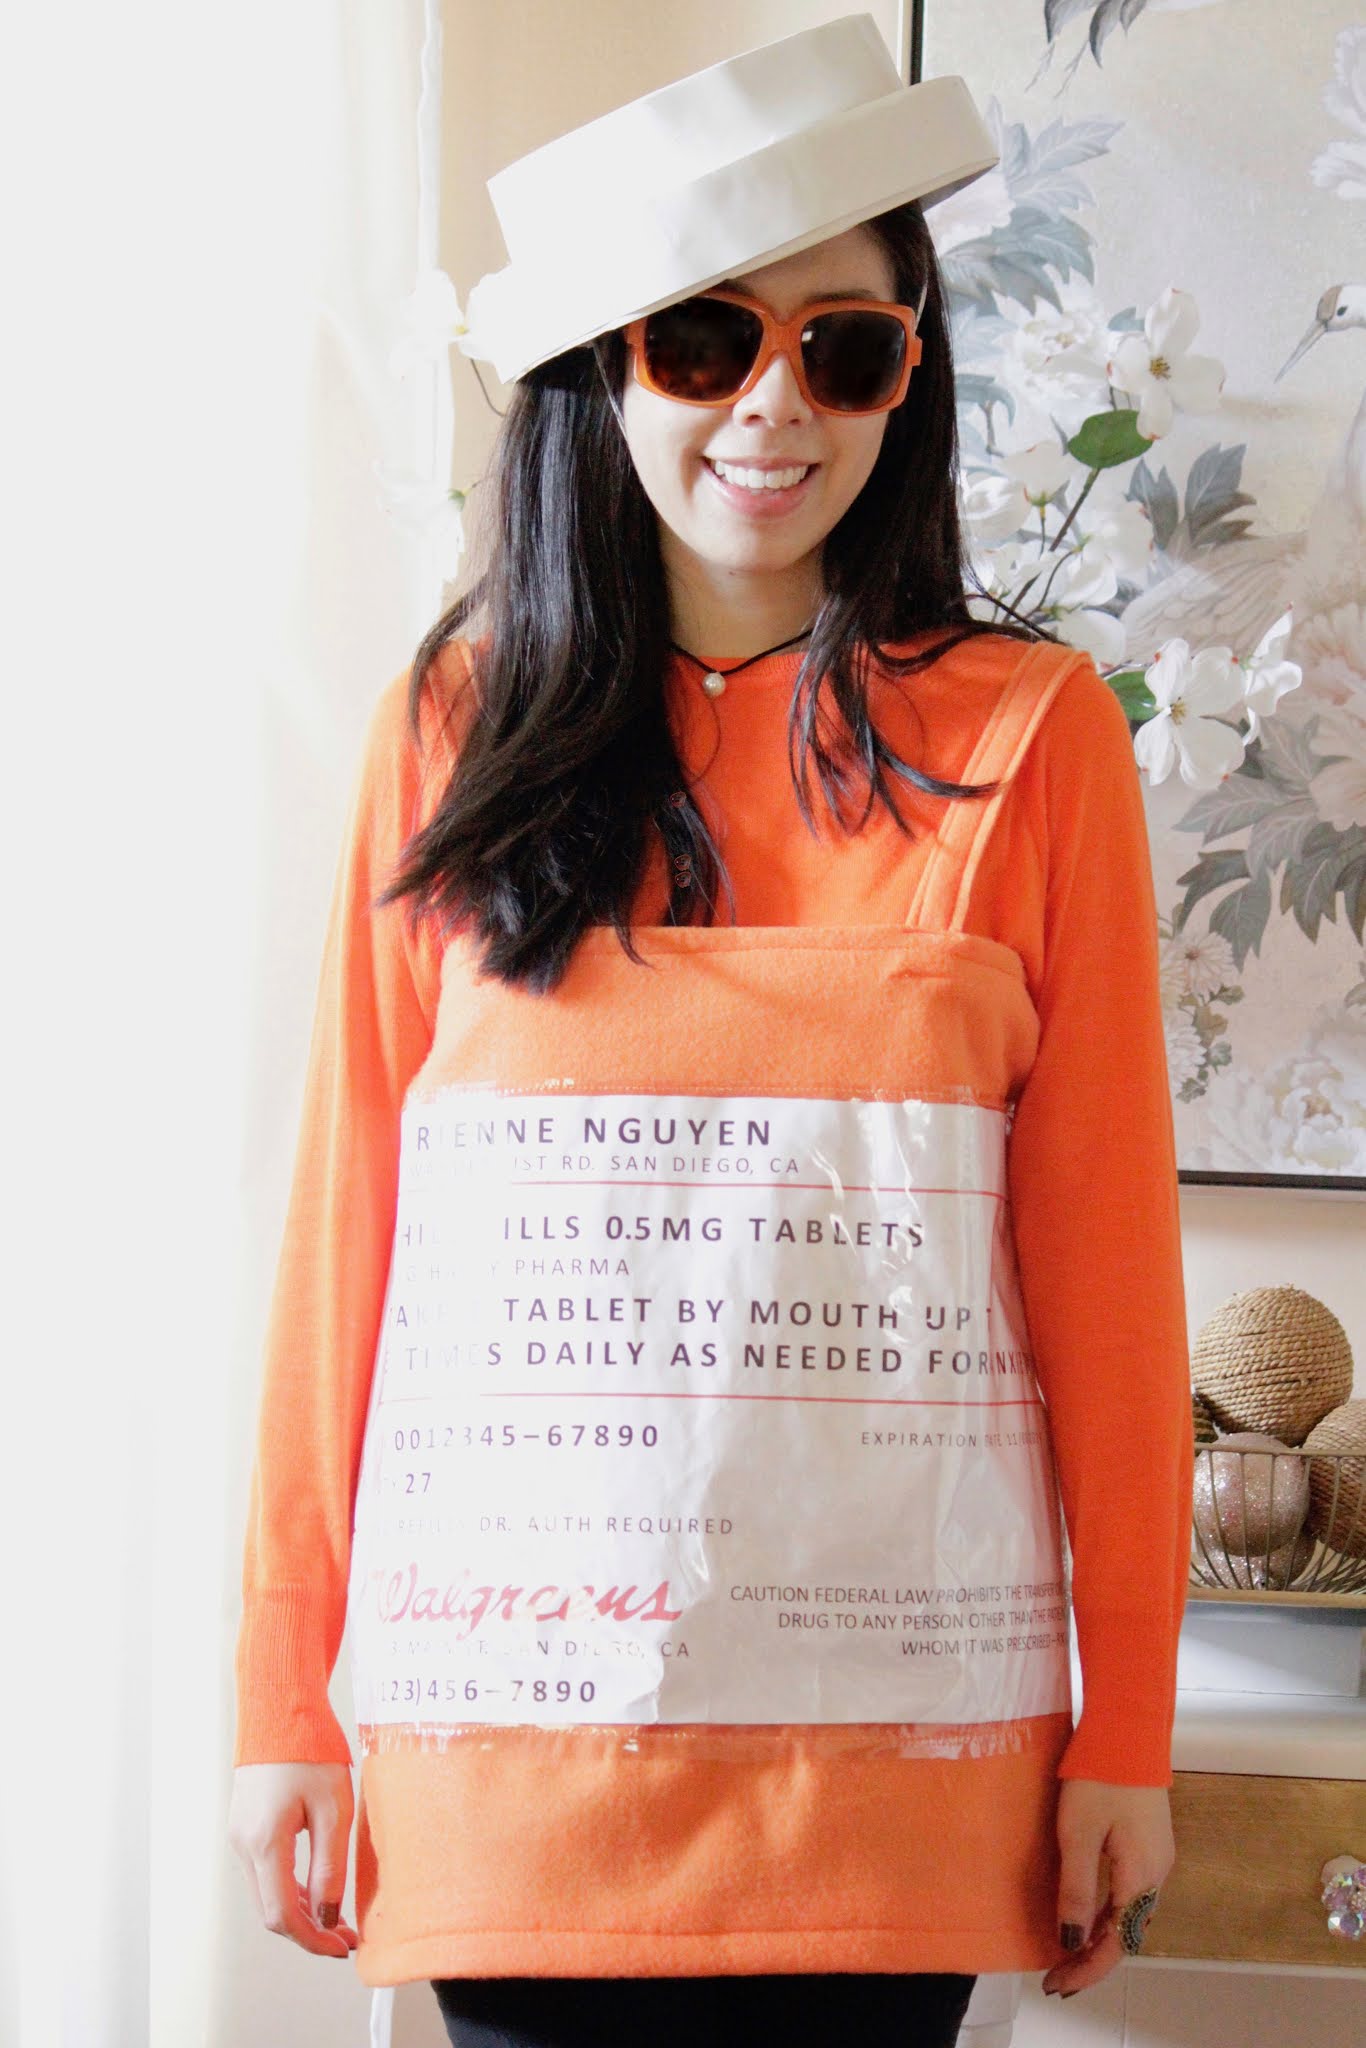 Adrienne Nguyen_DIY Felt Fabric and Construction Paper Halloween Costume_What to Wear on Pharmacy Day